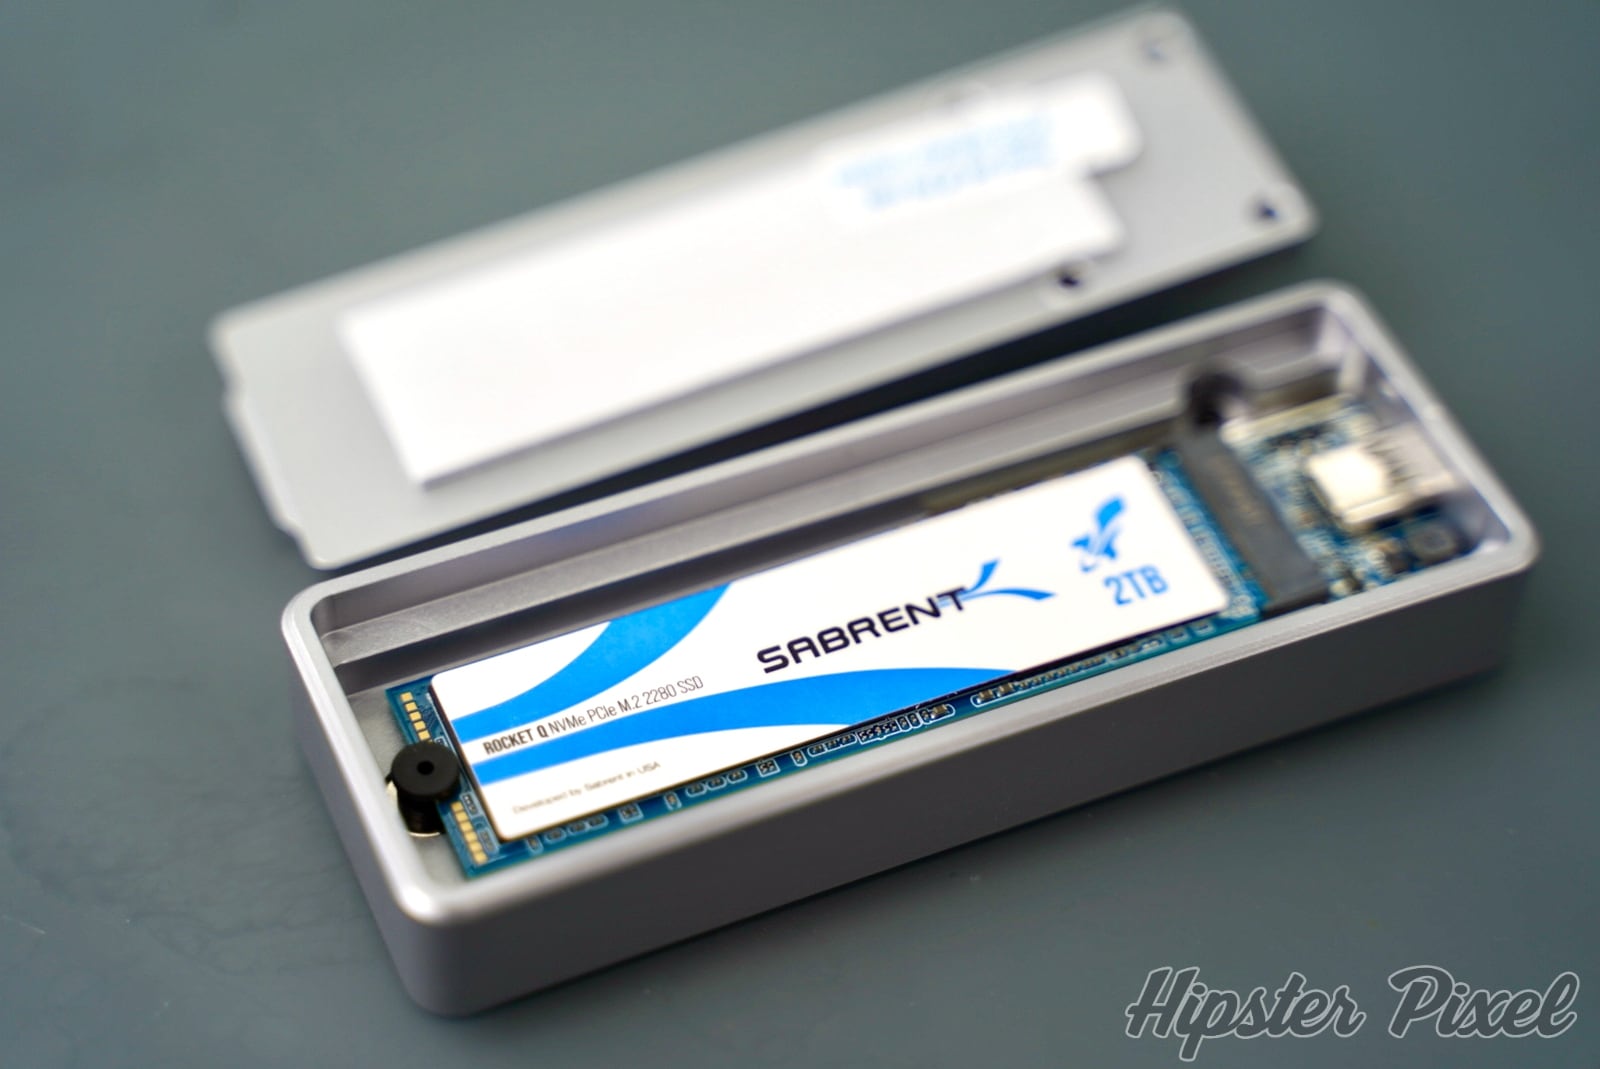 Sabrent USB 3.2 Tool-Free Enclosure for NVMe M.2 SSD Drives [Review]